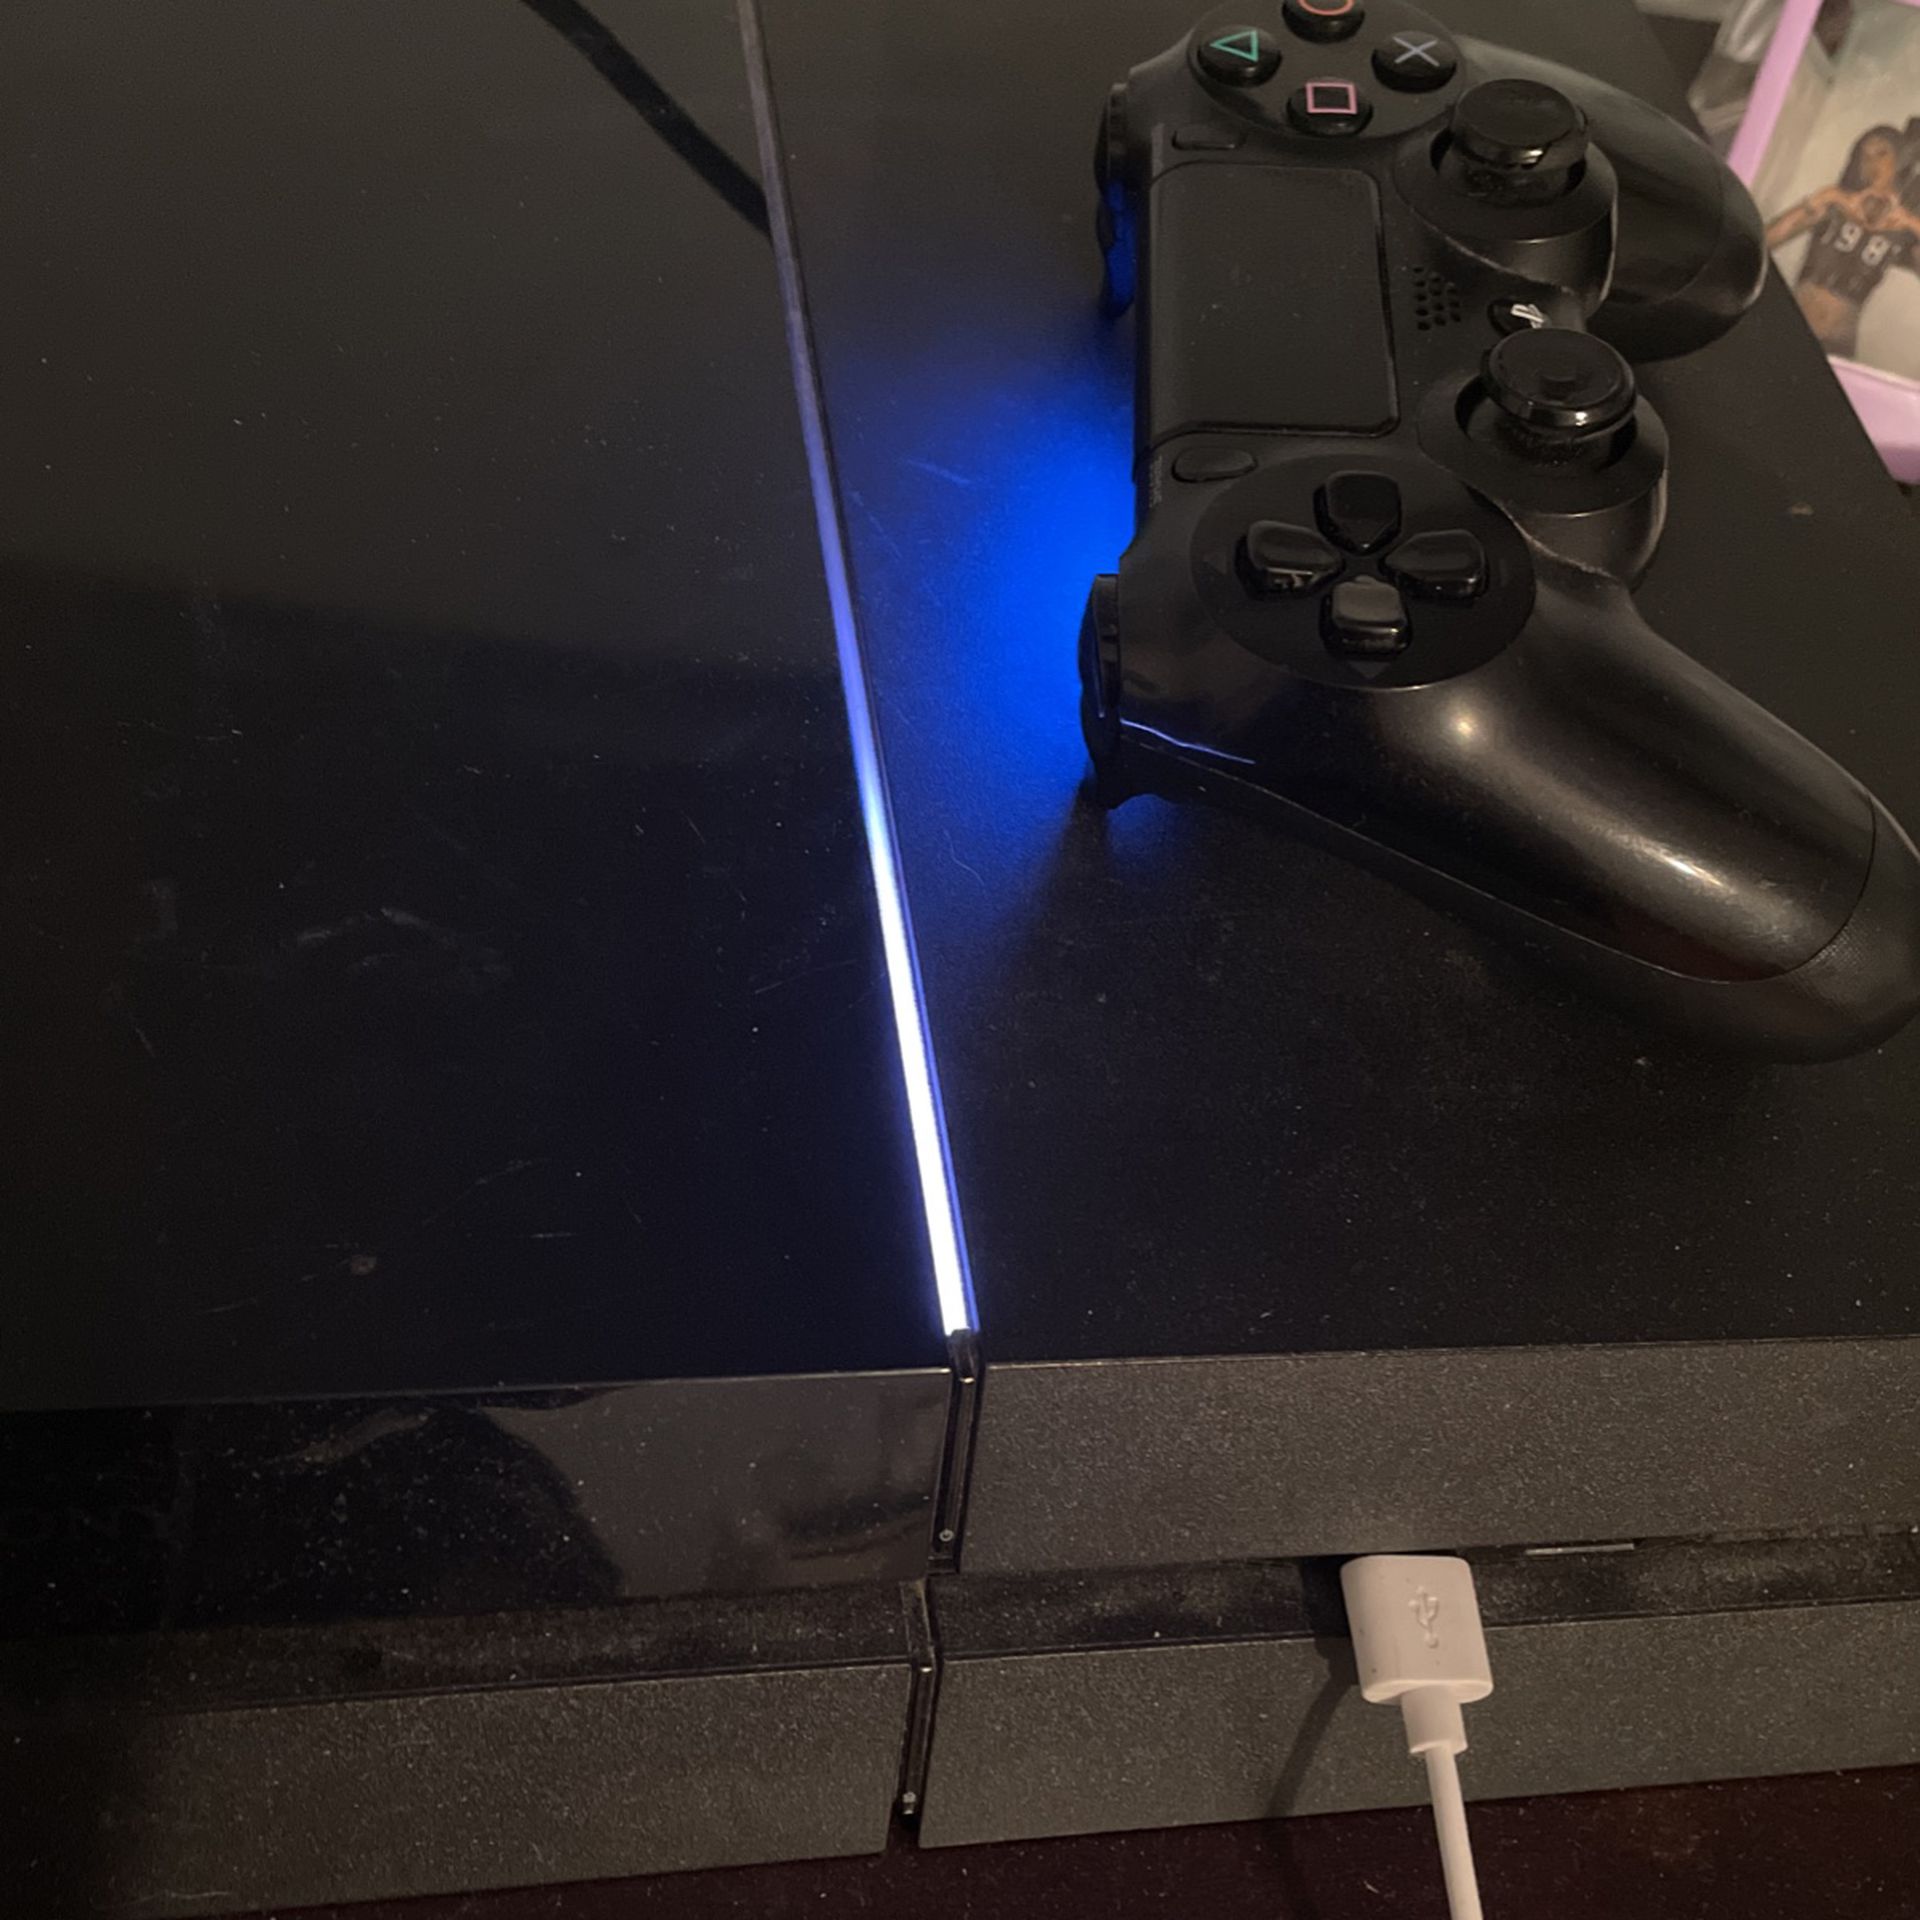 PS4 GREAT CONDITION HAS GAMES 